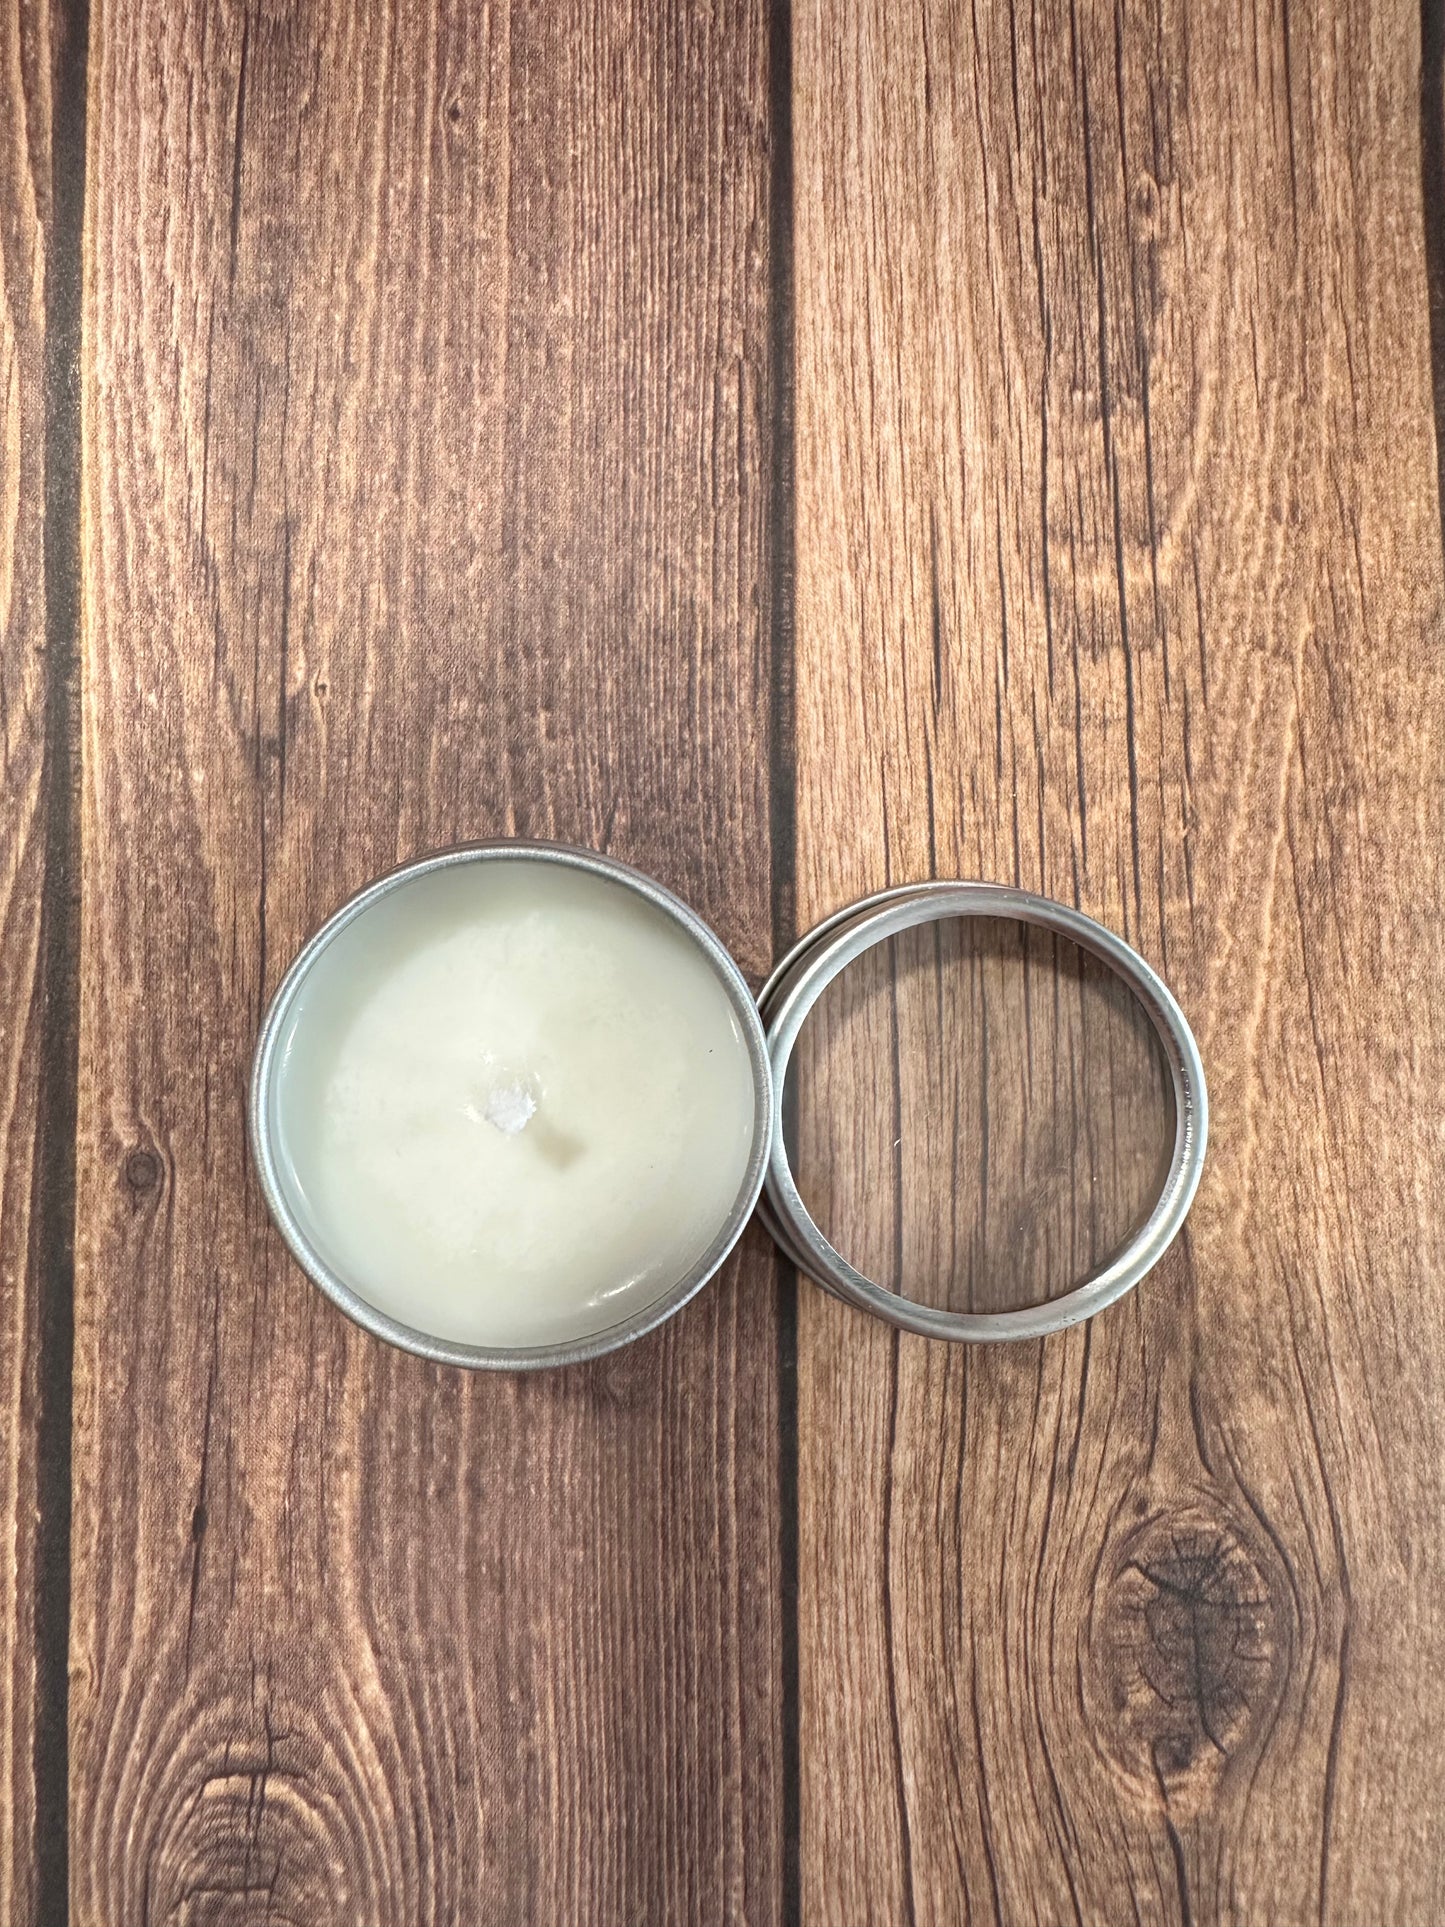 1 oz curved and chiseled sample candle